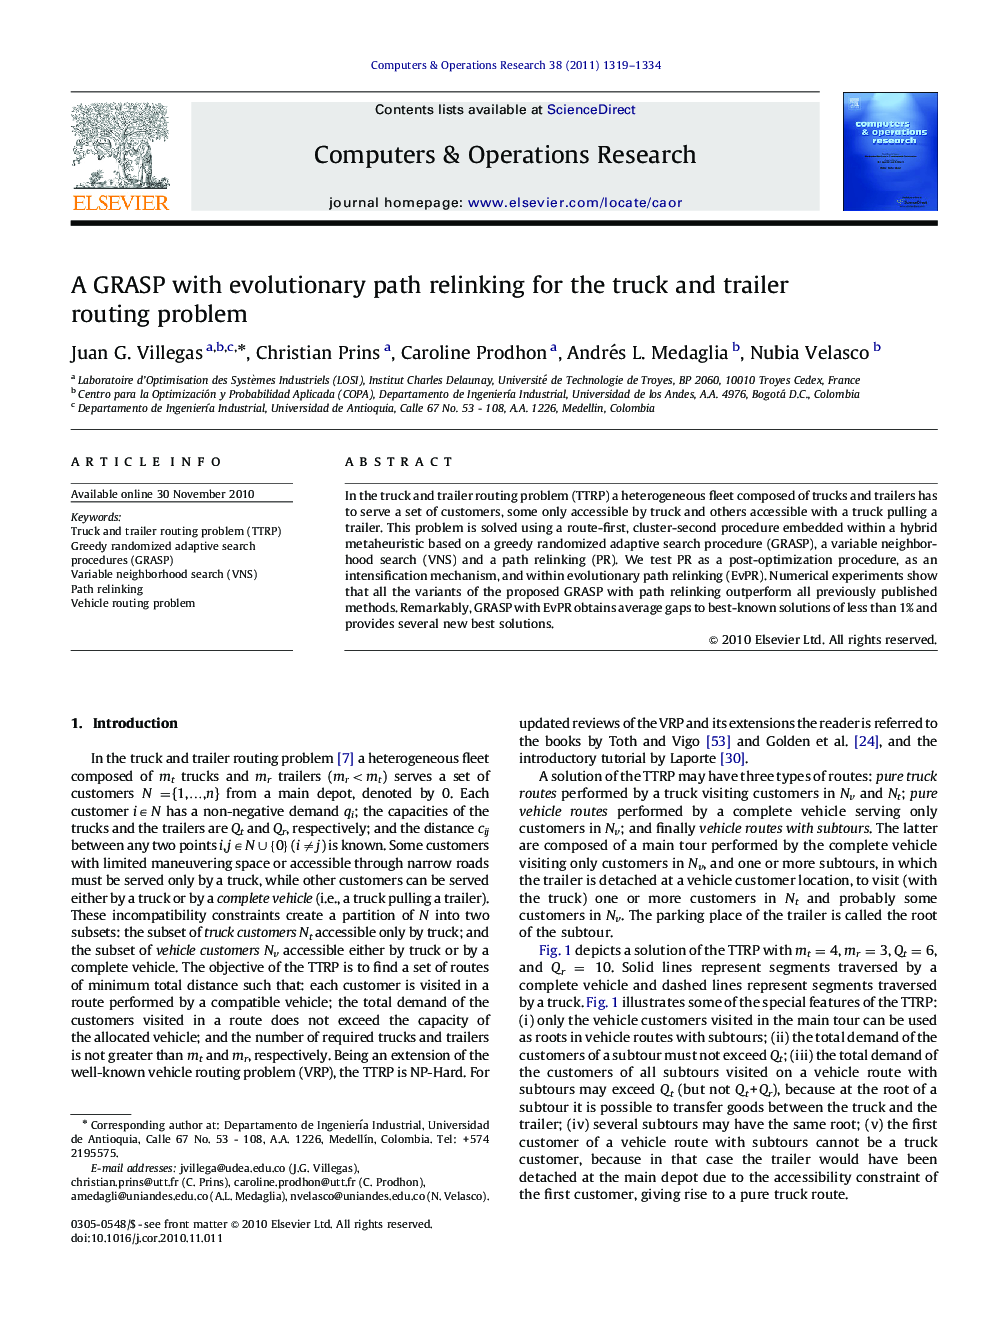 A GRASP with evolutionary path relinking for the truck and trailer routing problem